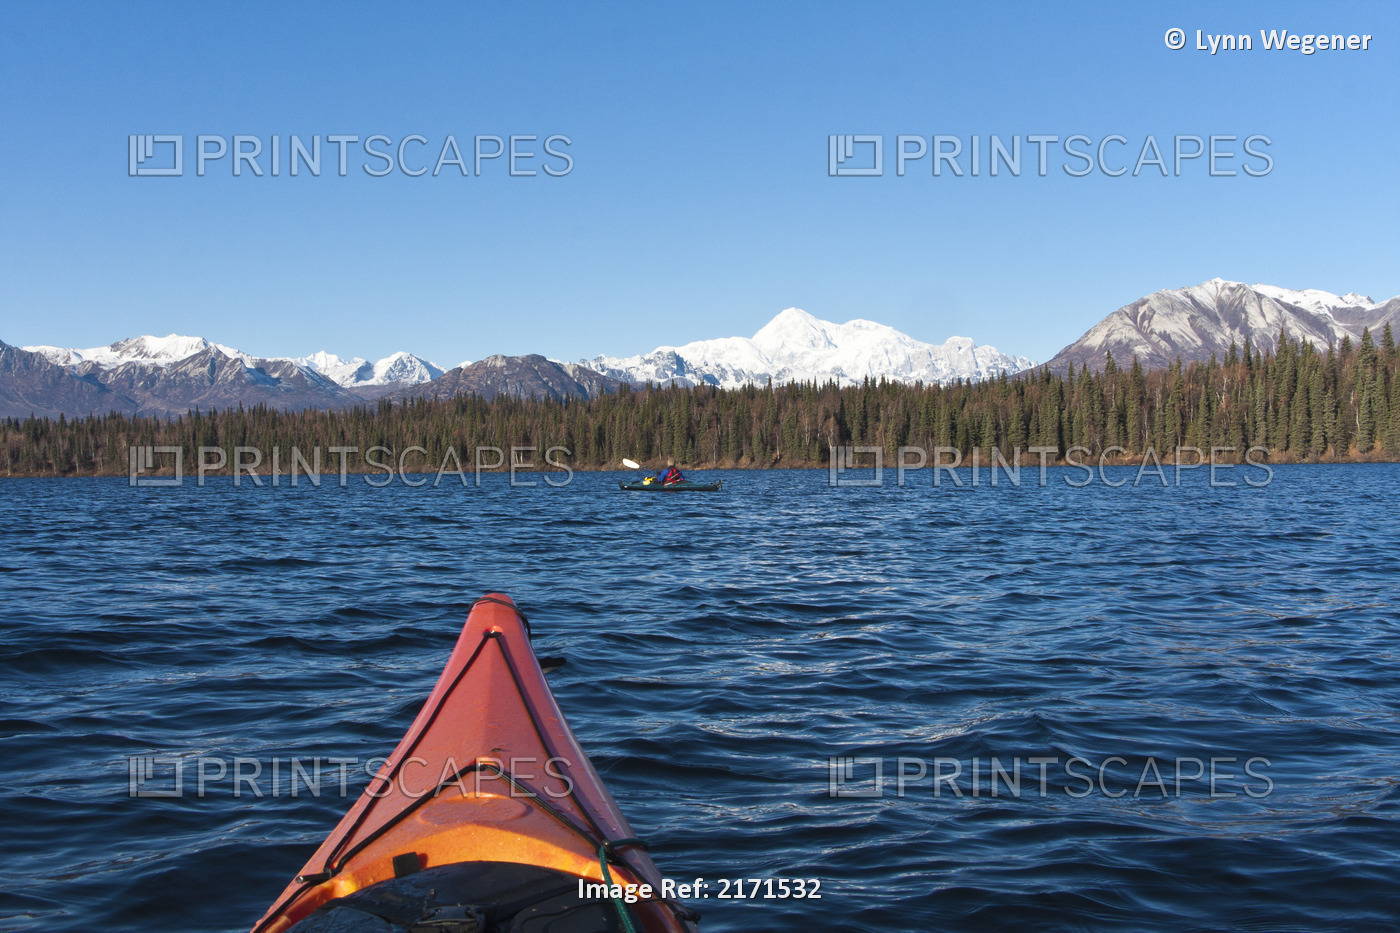 Woman Kayaking In Byers Lake As Seen From Another Kayaker's Point Of View With ...